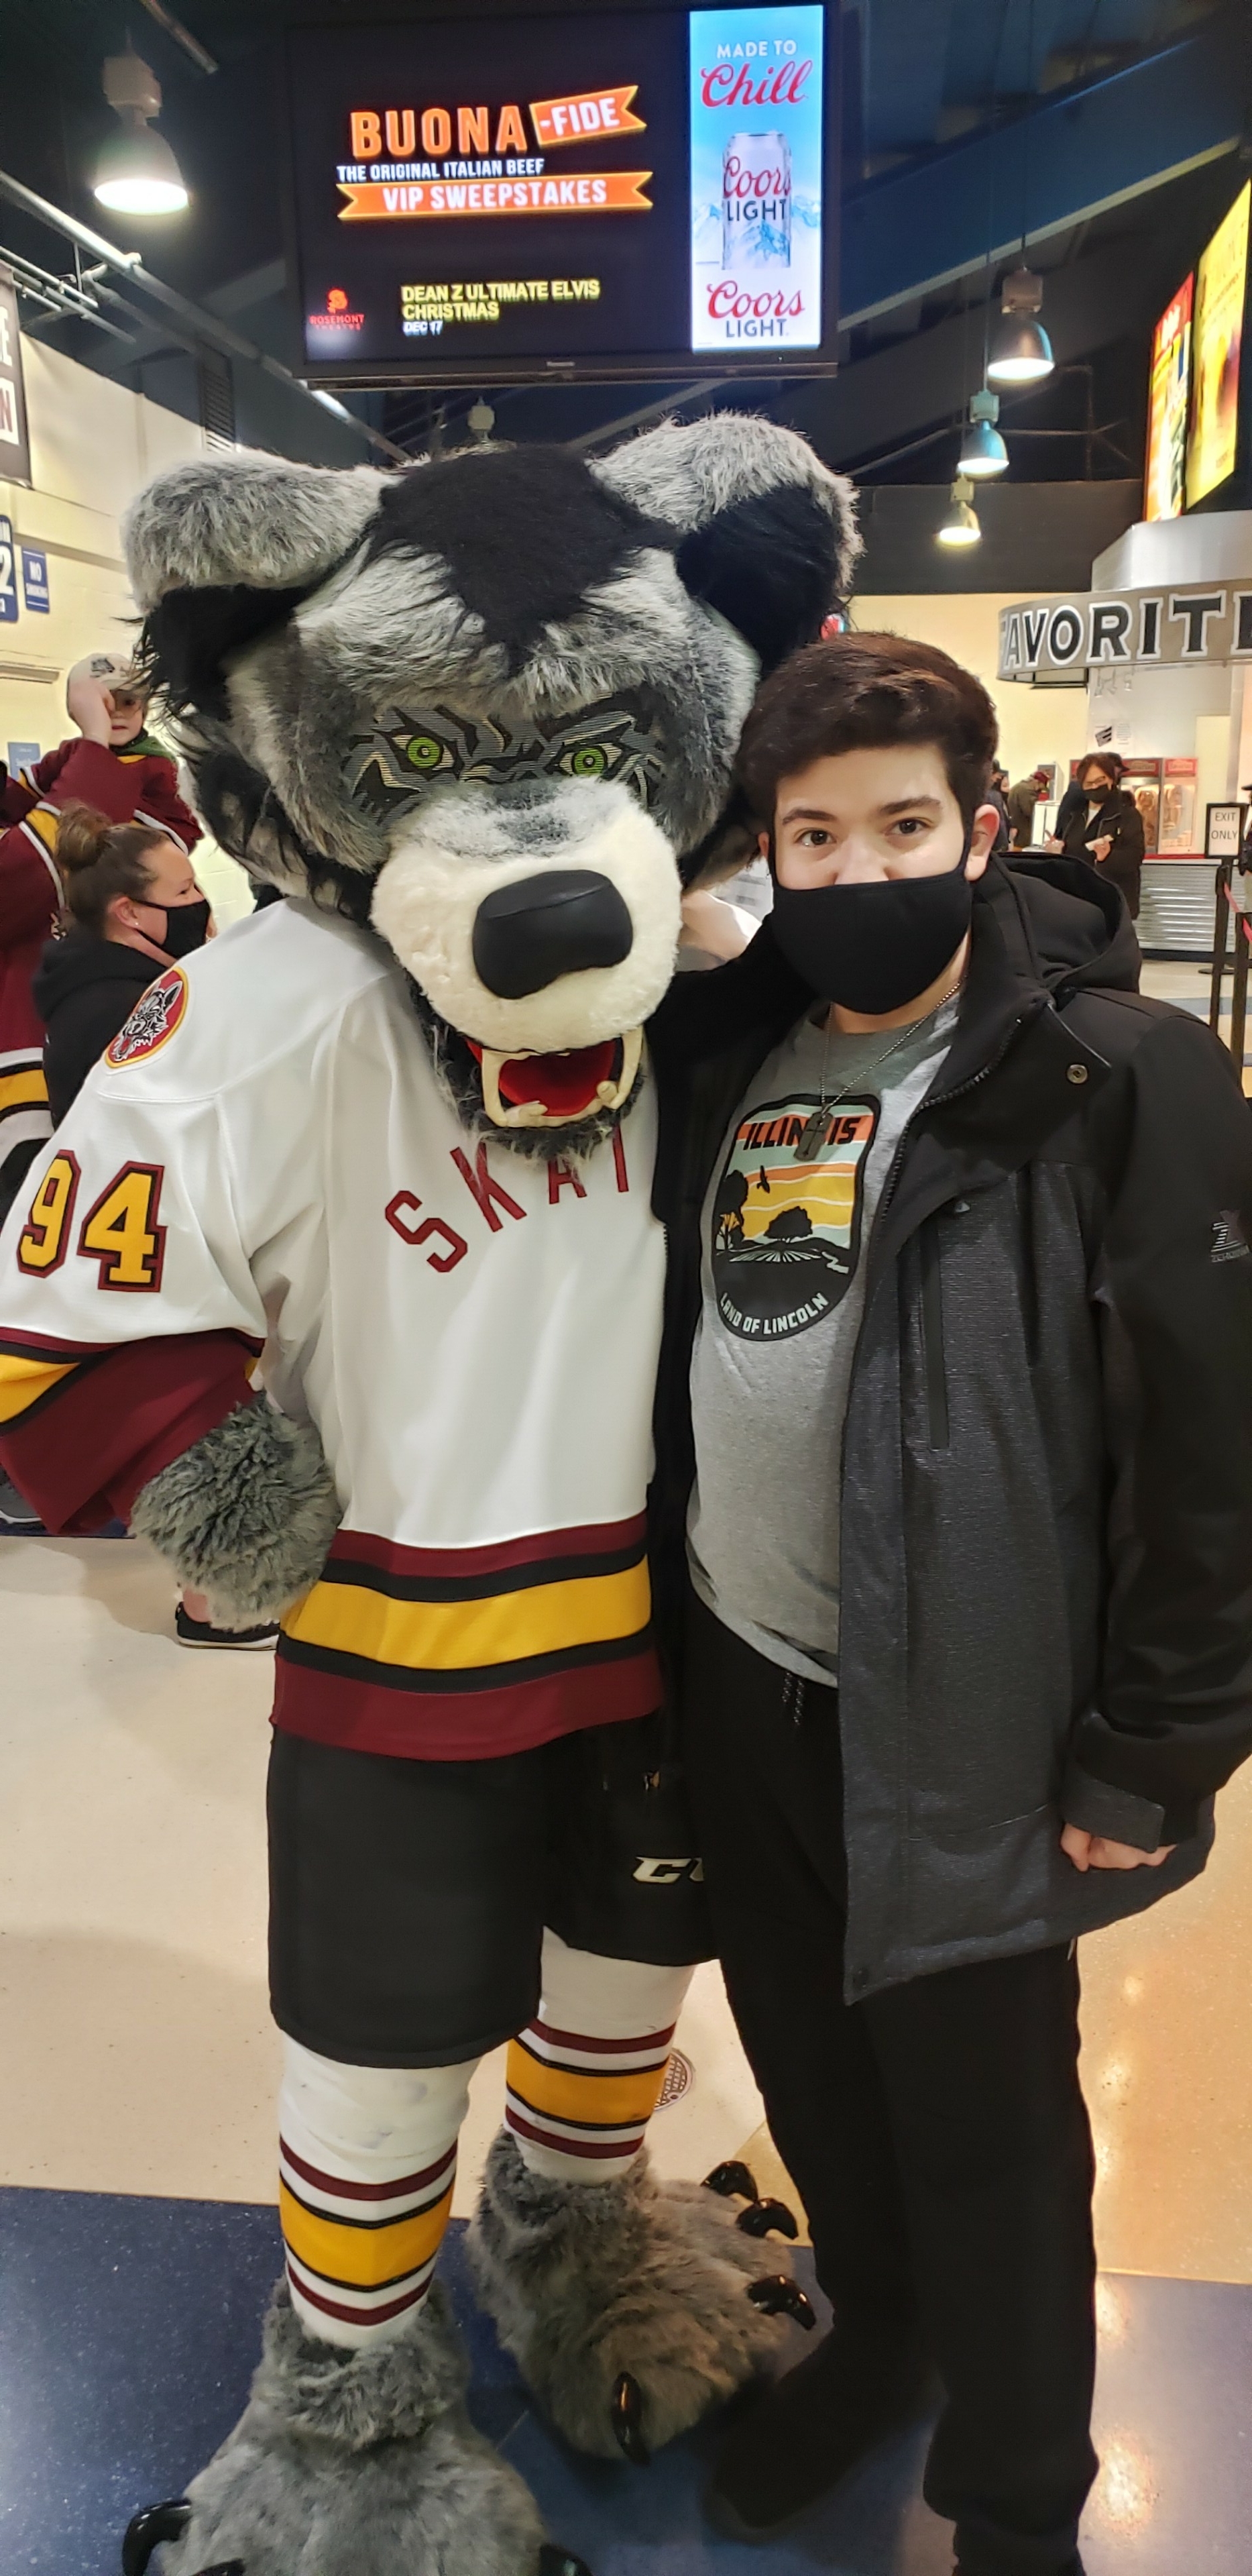 About Skates - Chicago Wolves